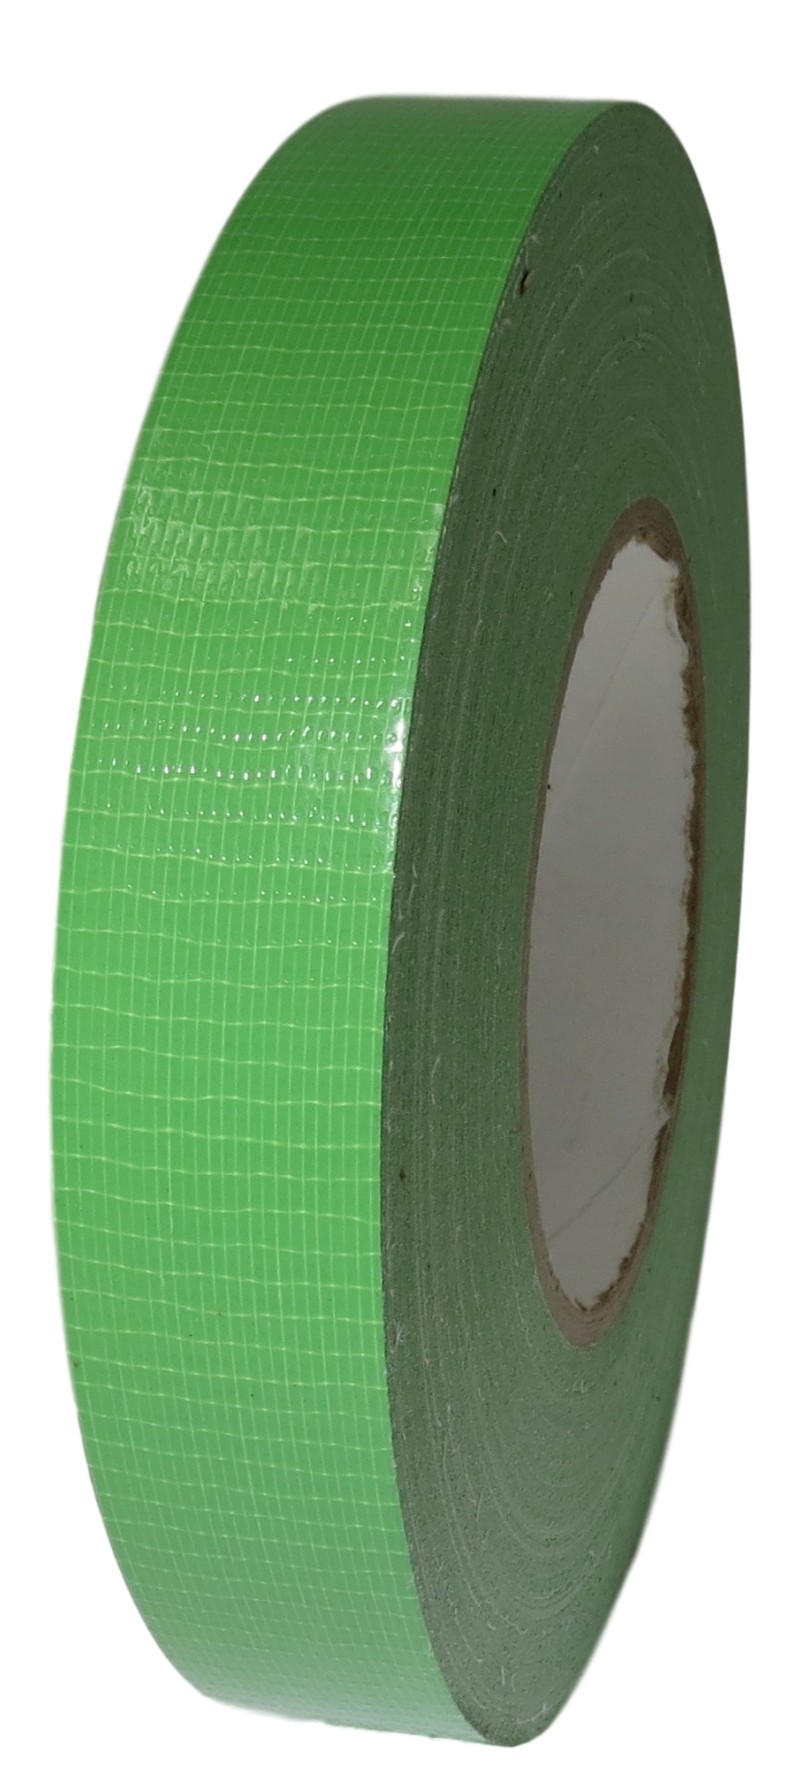  WOD DTC10 Advanced Strength Industrial Grade Light Green Duct  Tape, 4 inch x 60 yds. Waterproof, UV Resistant For Crafts & Home  Improvement : Industrial & Scientific